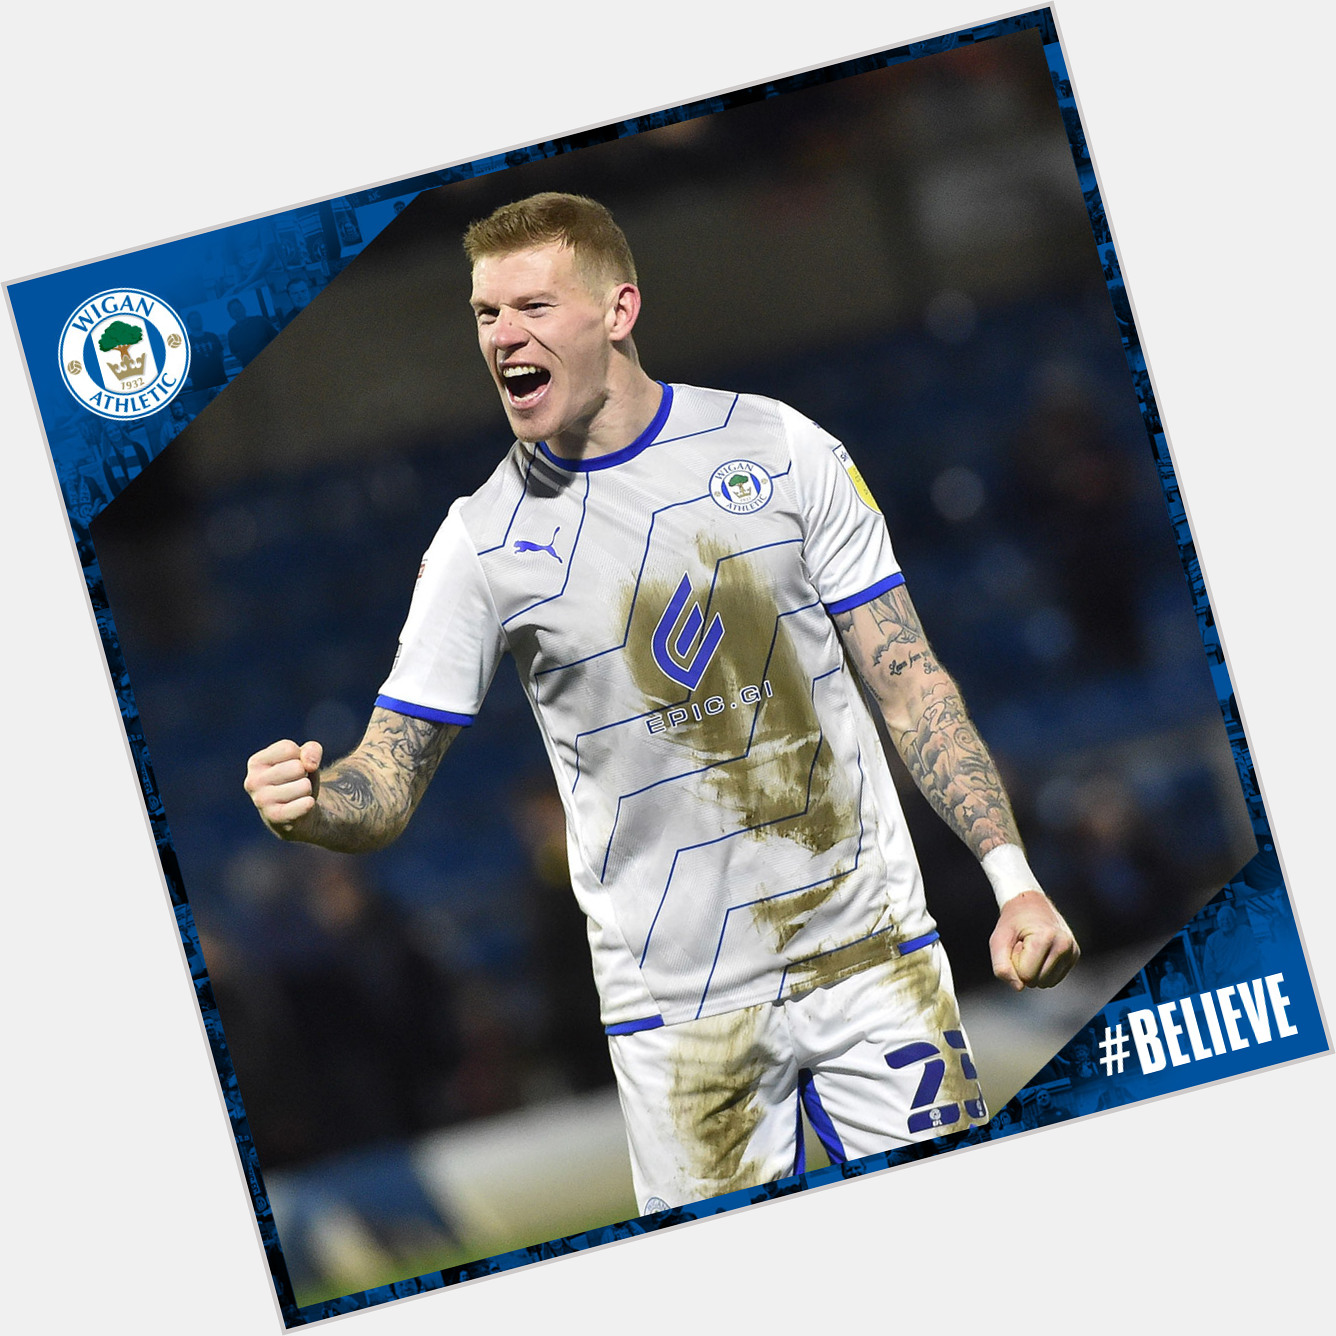   Wishing Happy Birthday to James McClean! Have a great day, Maca!     